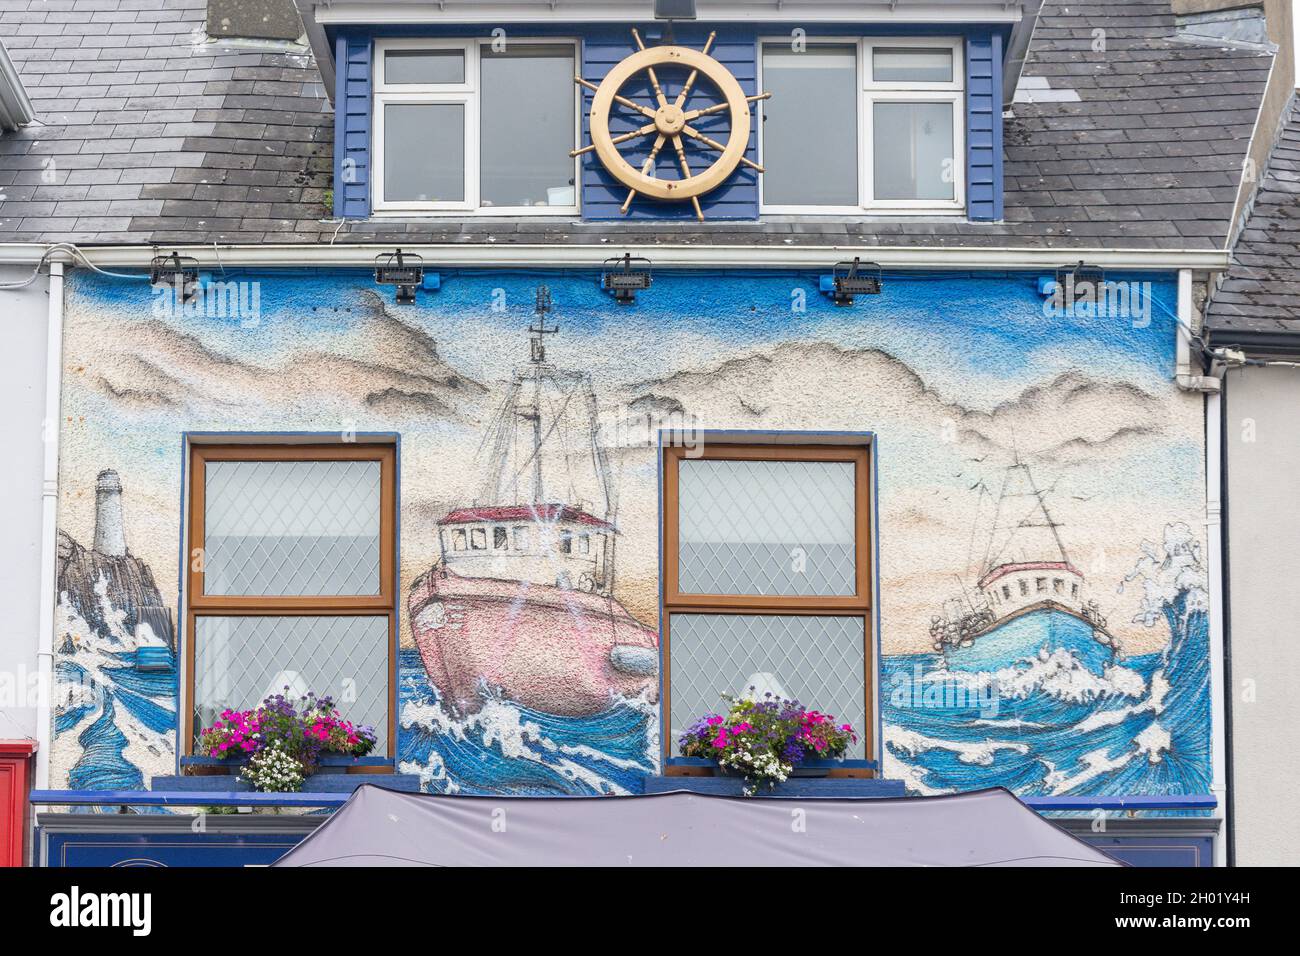 The Harbour Restaurant & Bar, Quay Street, The Glebe, Donegal (Dun na nGall), County Donegal, Republic of Ireland Stock Photo